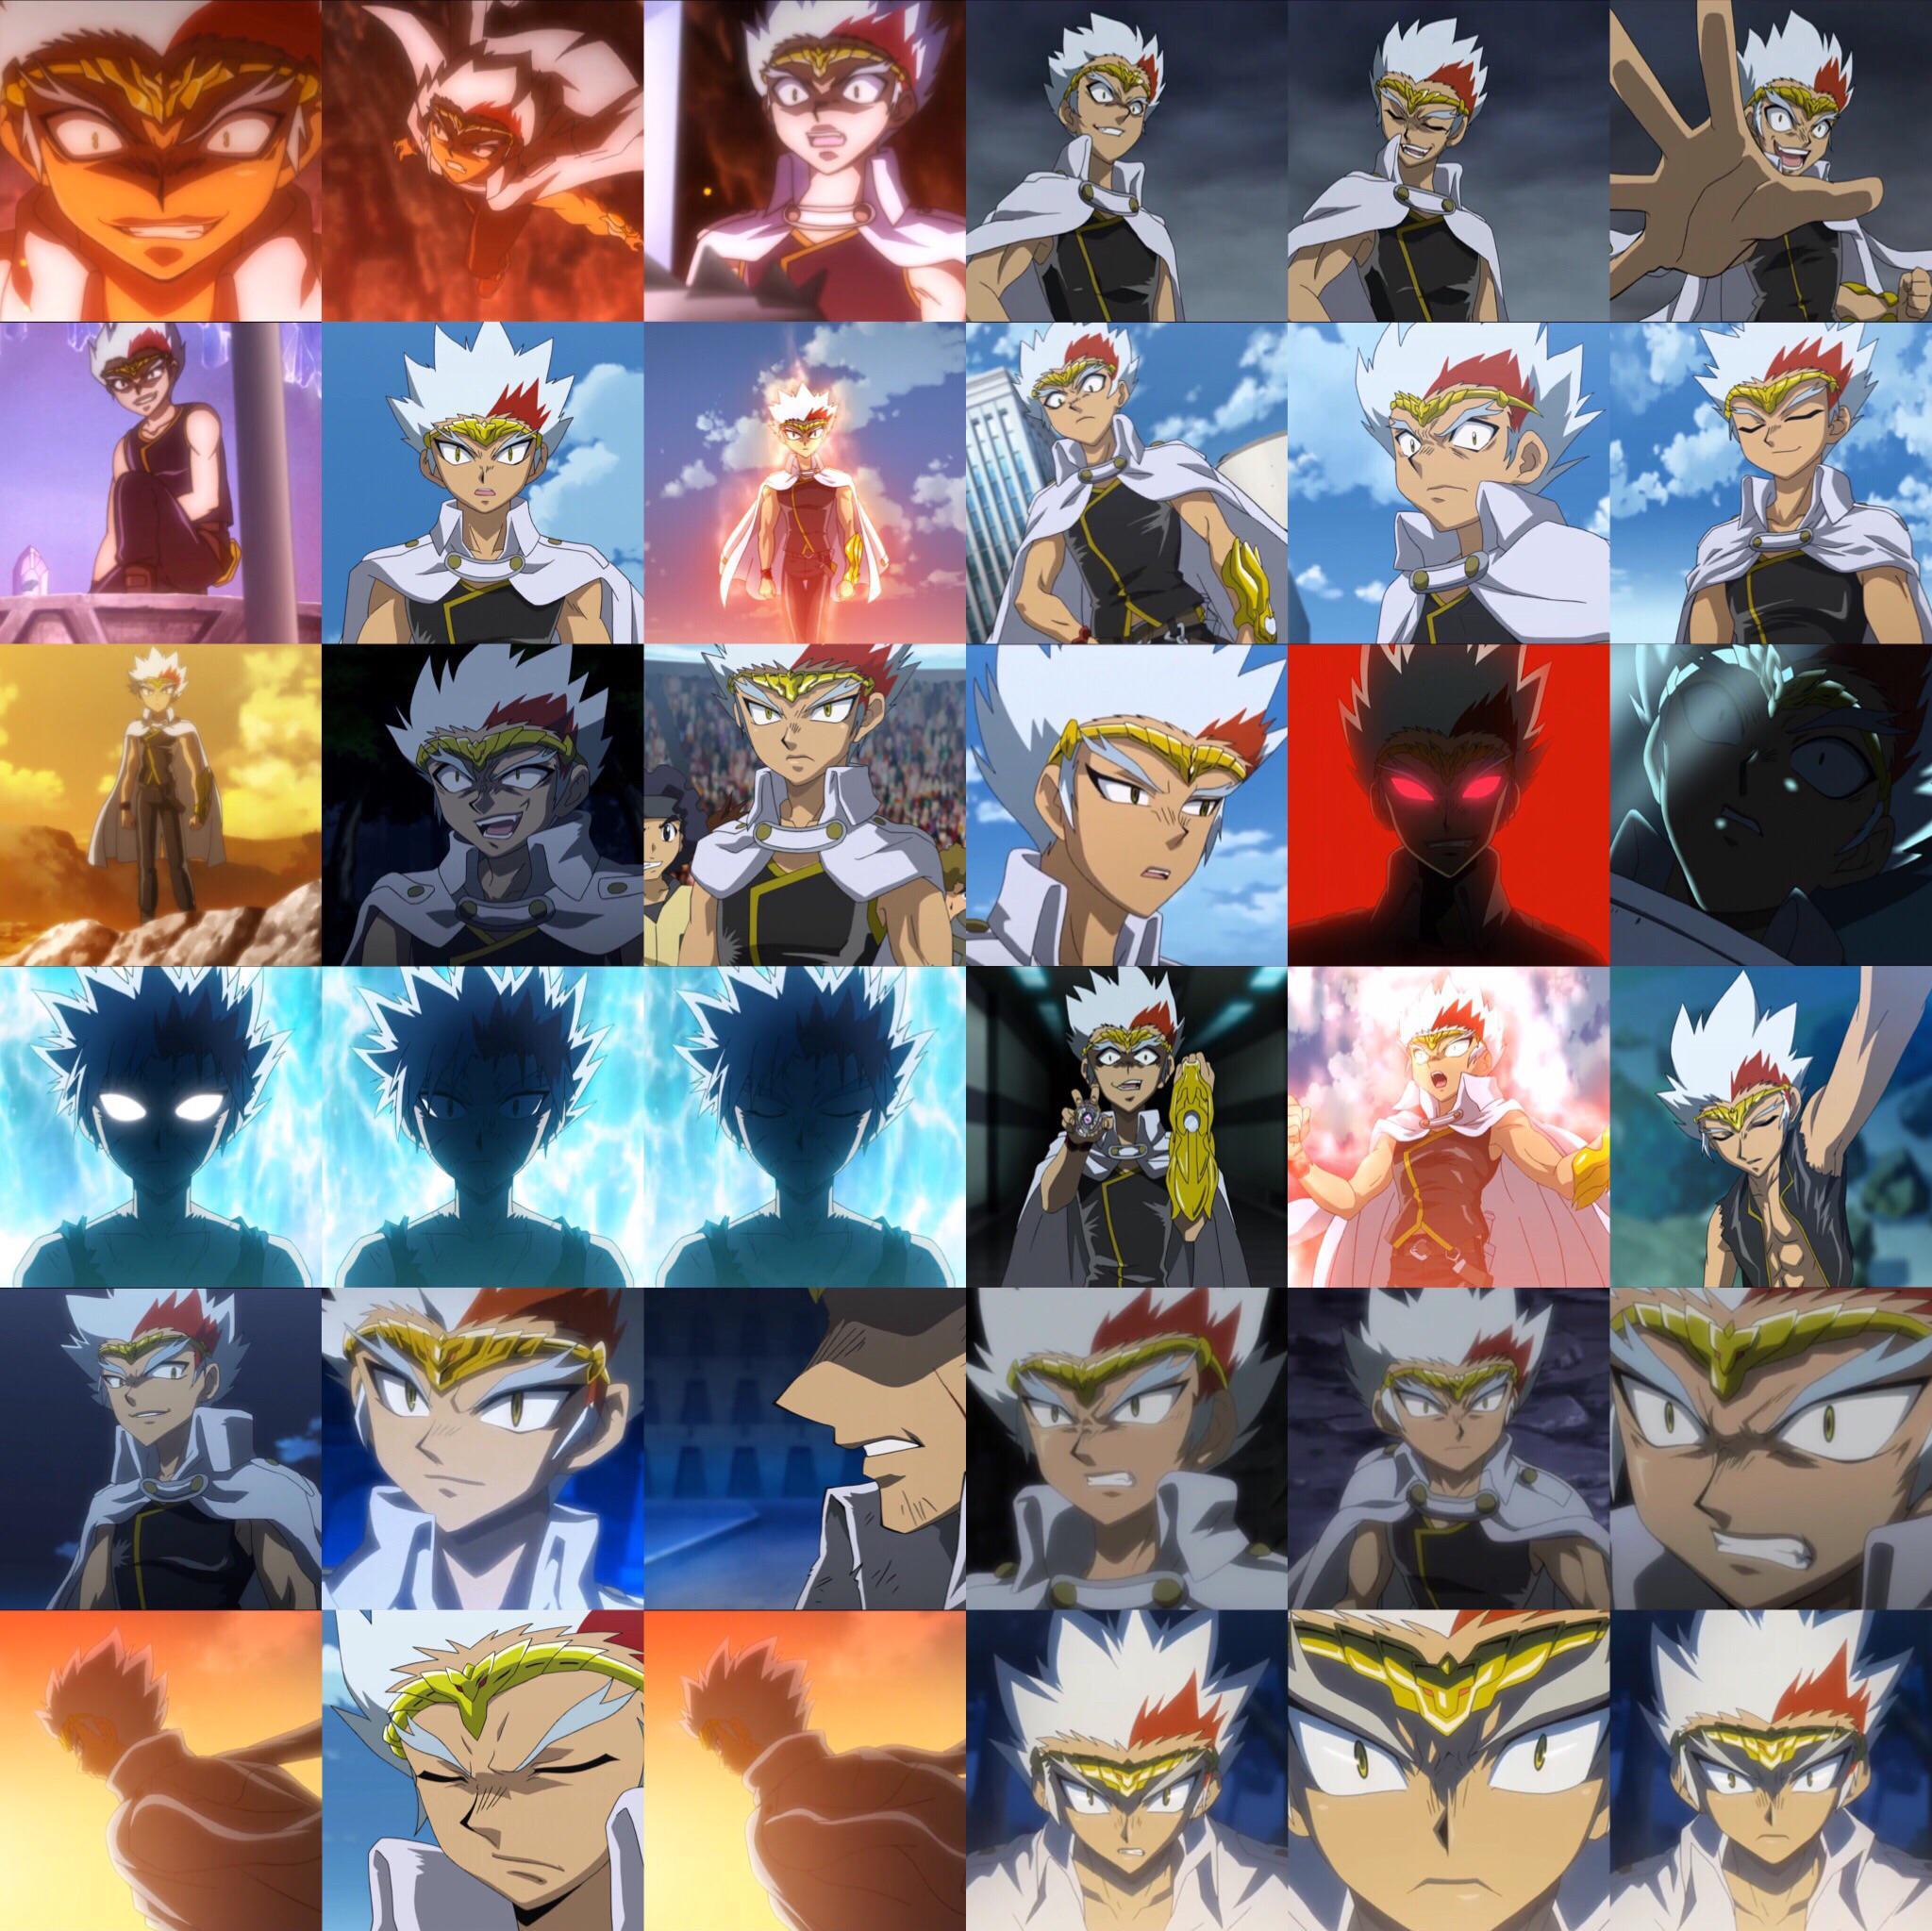 I own quite a bit of Ryuga images in My Photo Library rRyuga